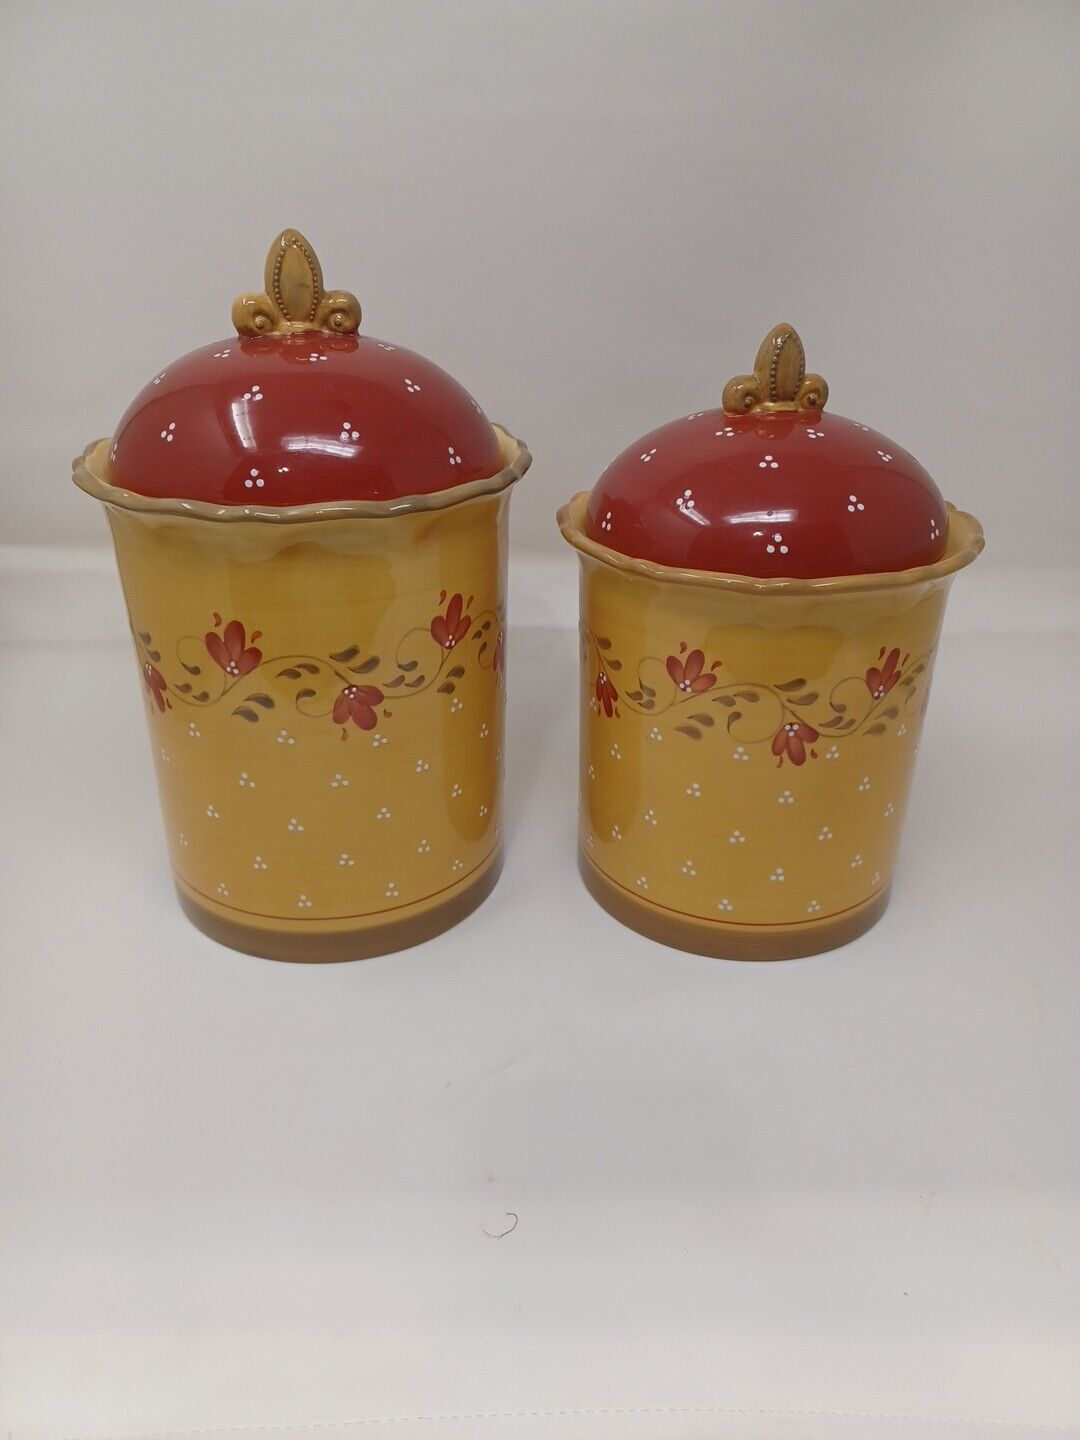 2003 Demdaco Birnvenuel Lg. Canister & Lid Set Of 2 Hand-painted